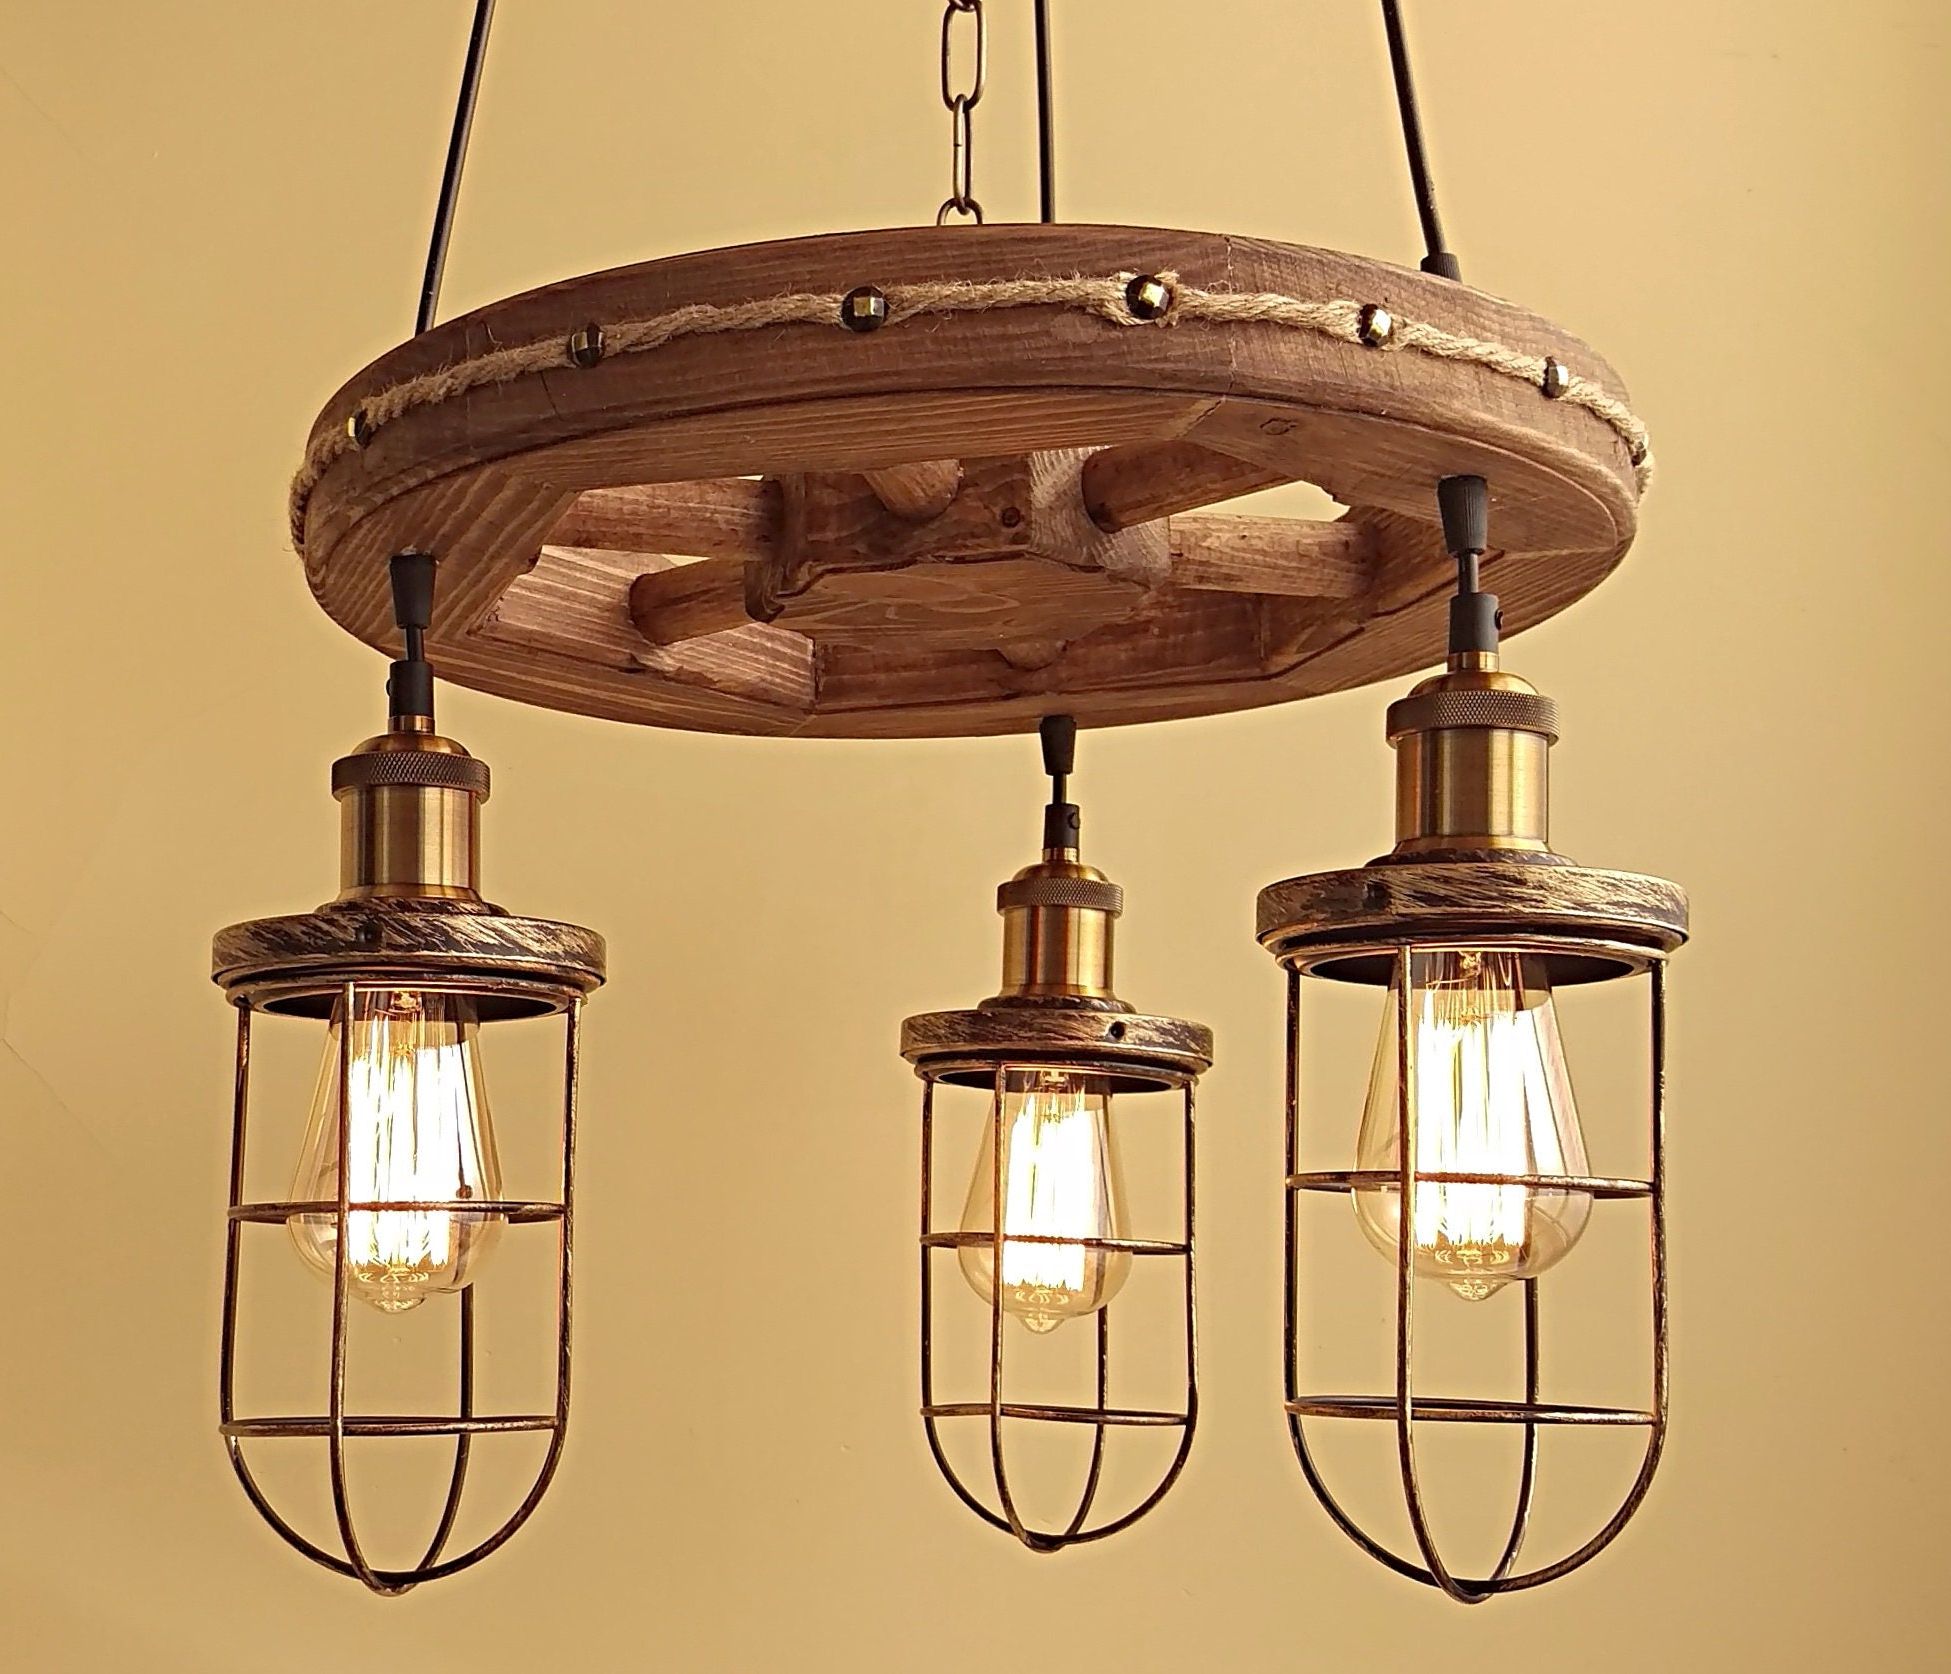 Wagon Wheel Chandeliers Throughout Most Recent Handmade Rustic Wood Wagon Wheel Chandelier (View 6 of 20)